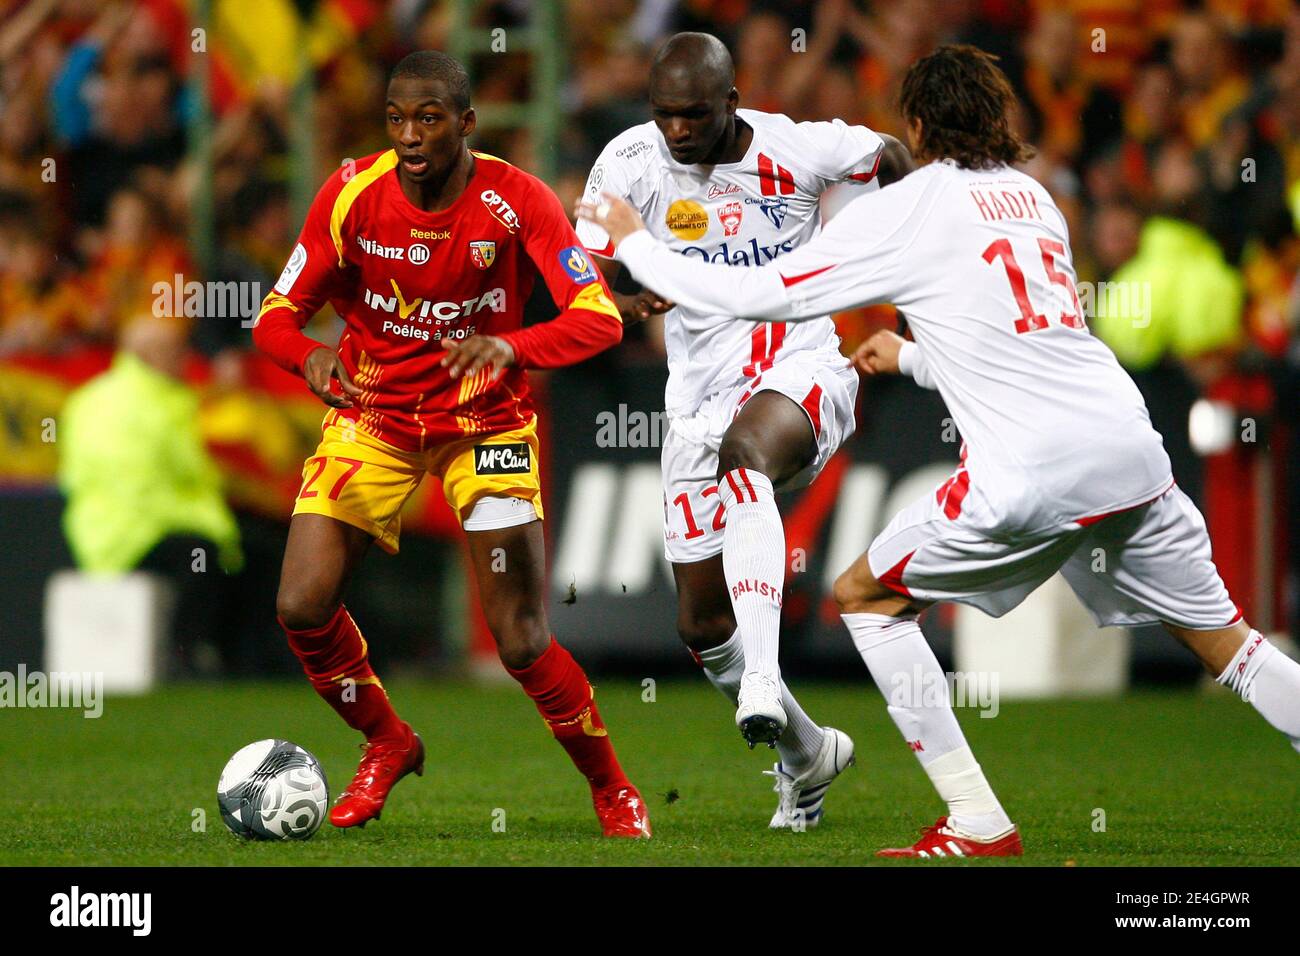 Lens' Samba Sow fights for the ball with Nancy's Bakaye Traore and Youssouf  Hadji (R) during the French First League soccer match, RC Lens vs AS Nancy  Lorraine at Felix Bollaert Stadium